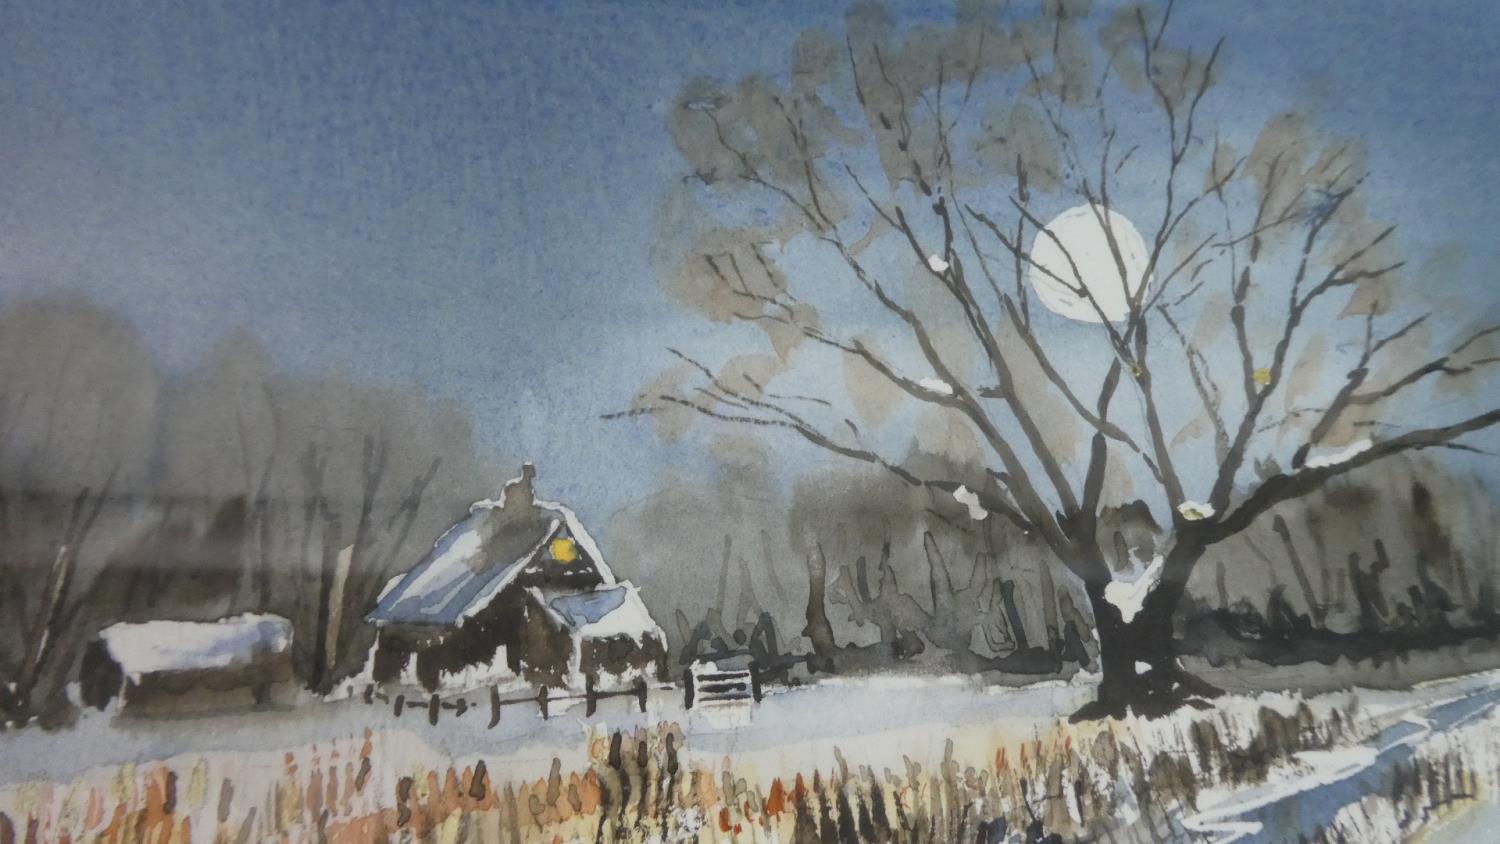 Two Framed Water Colours by John Stuttard Depicting Winter Landscapes - Image 2 of 3